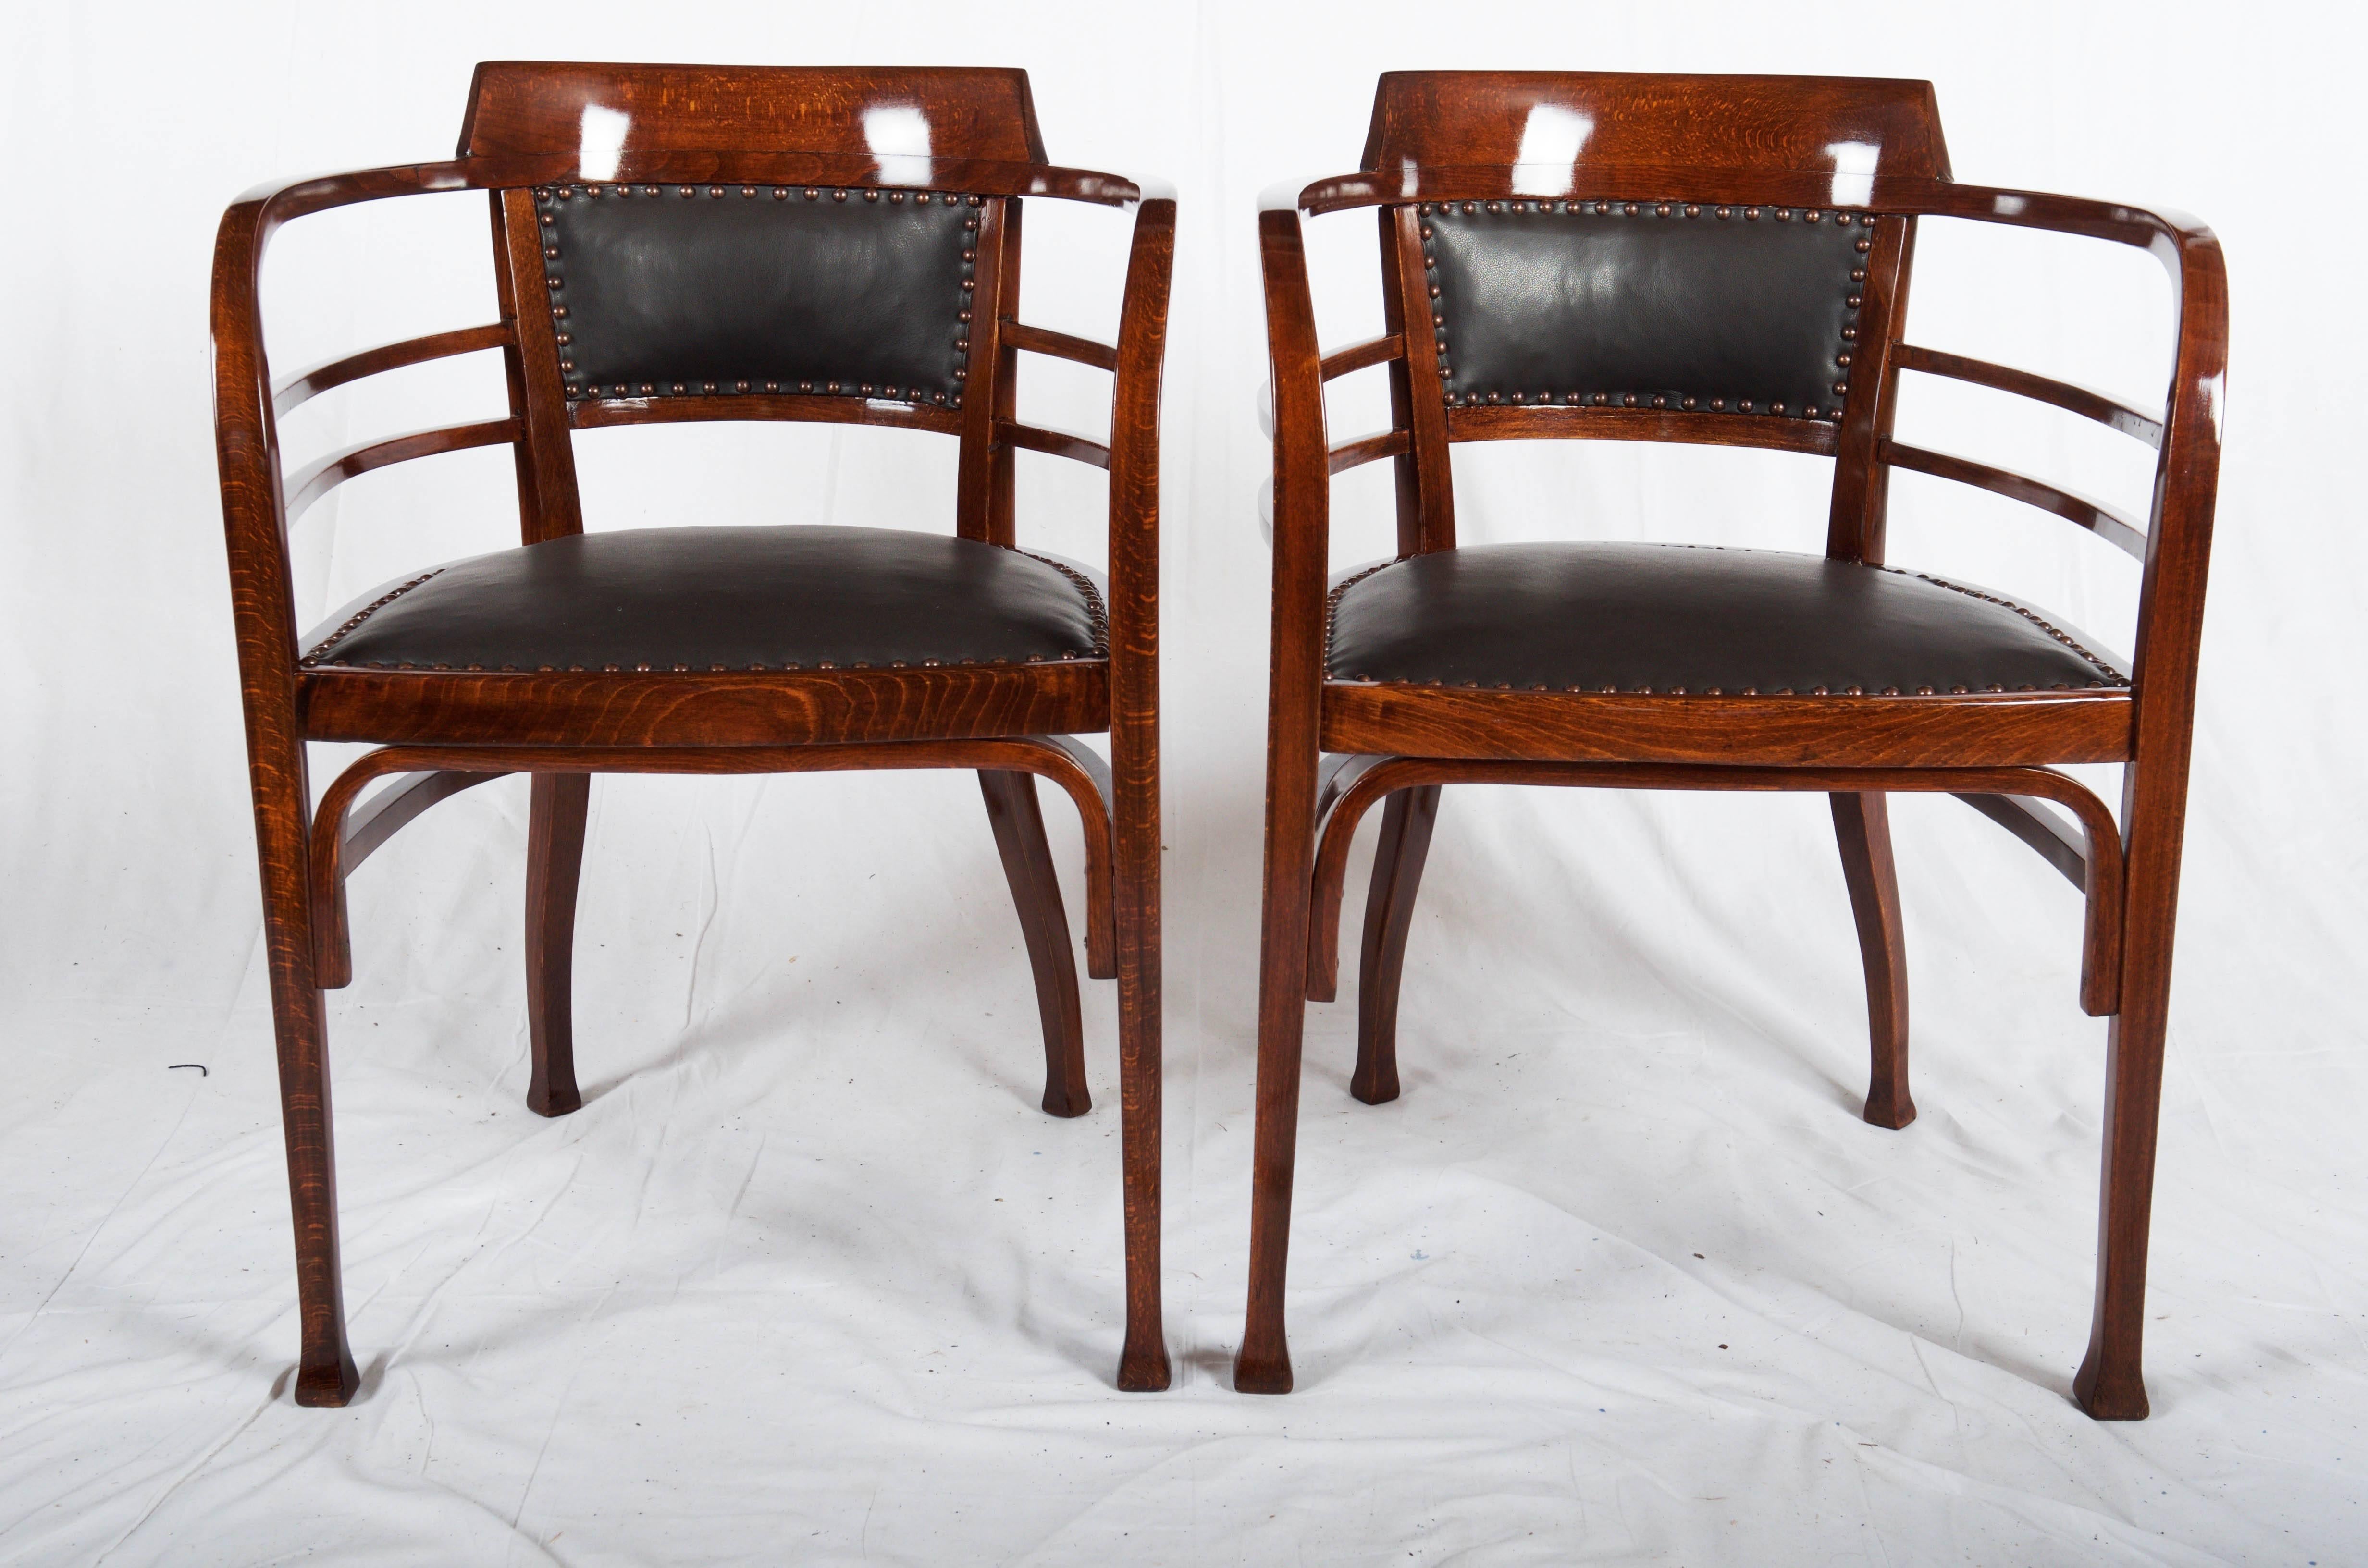 Design attributed to Otto Wagner. 
Wood finish and upholstery according to customer requirements.
Price for already restored ones.
Up to eight pieces available, more on request. Delivery time 3-4 weeks.